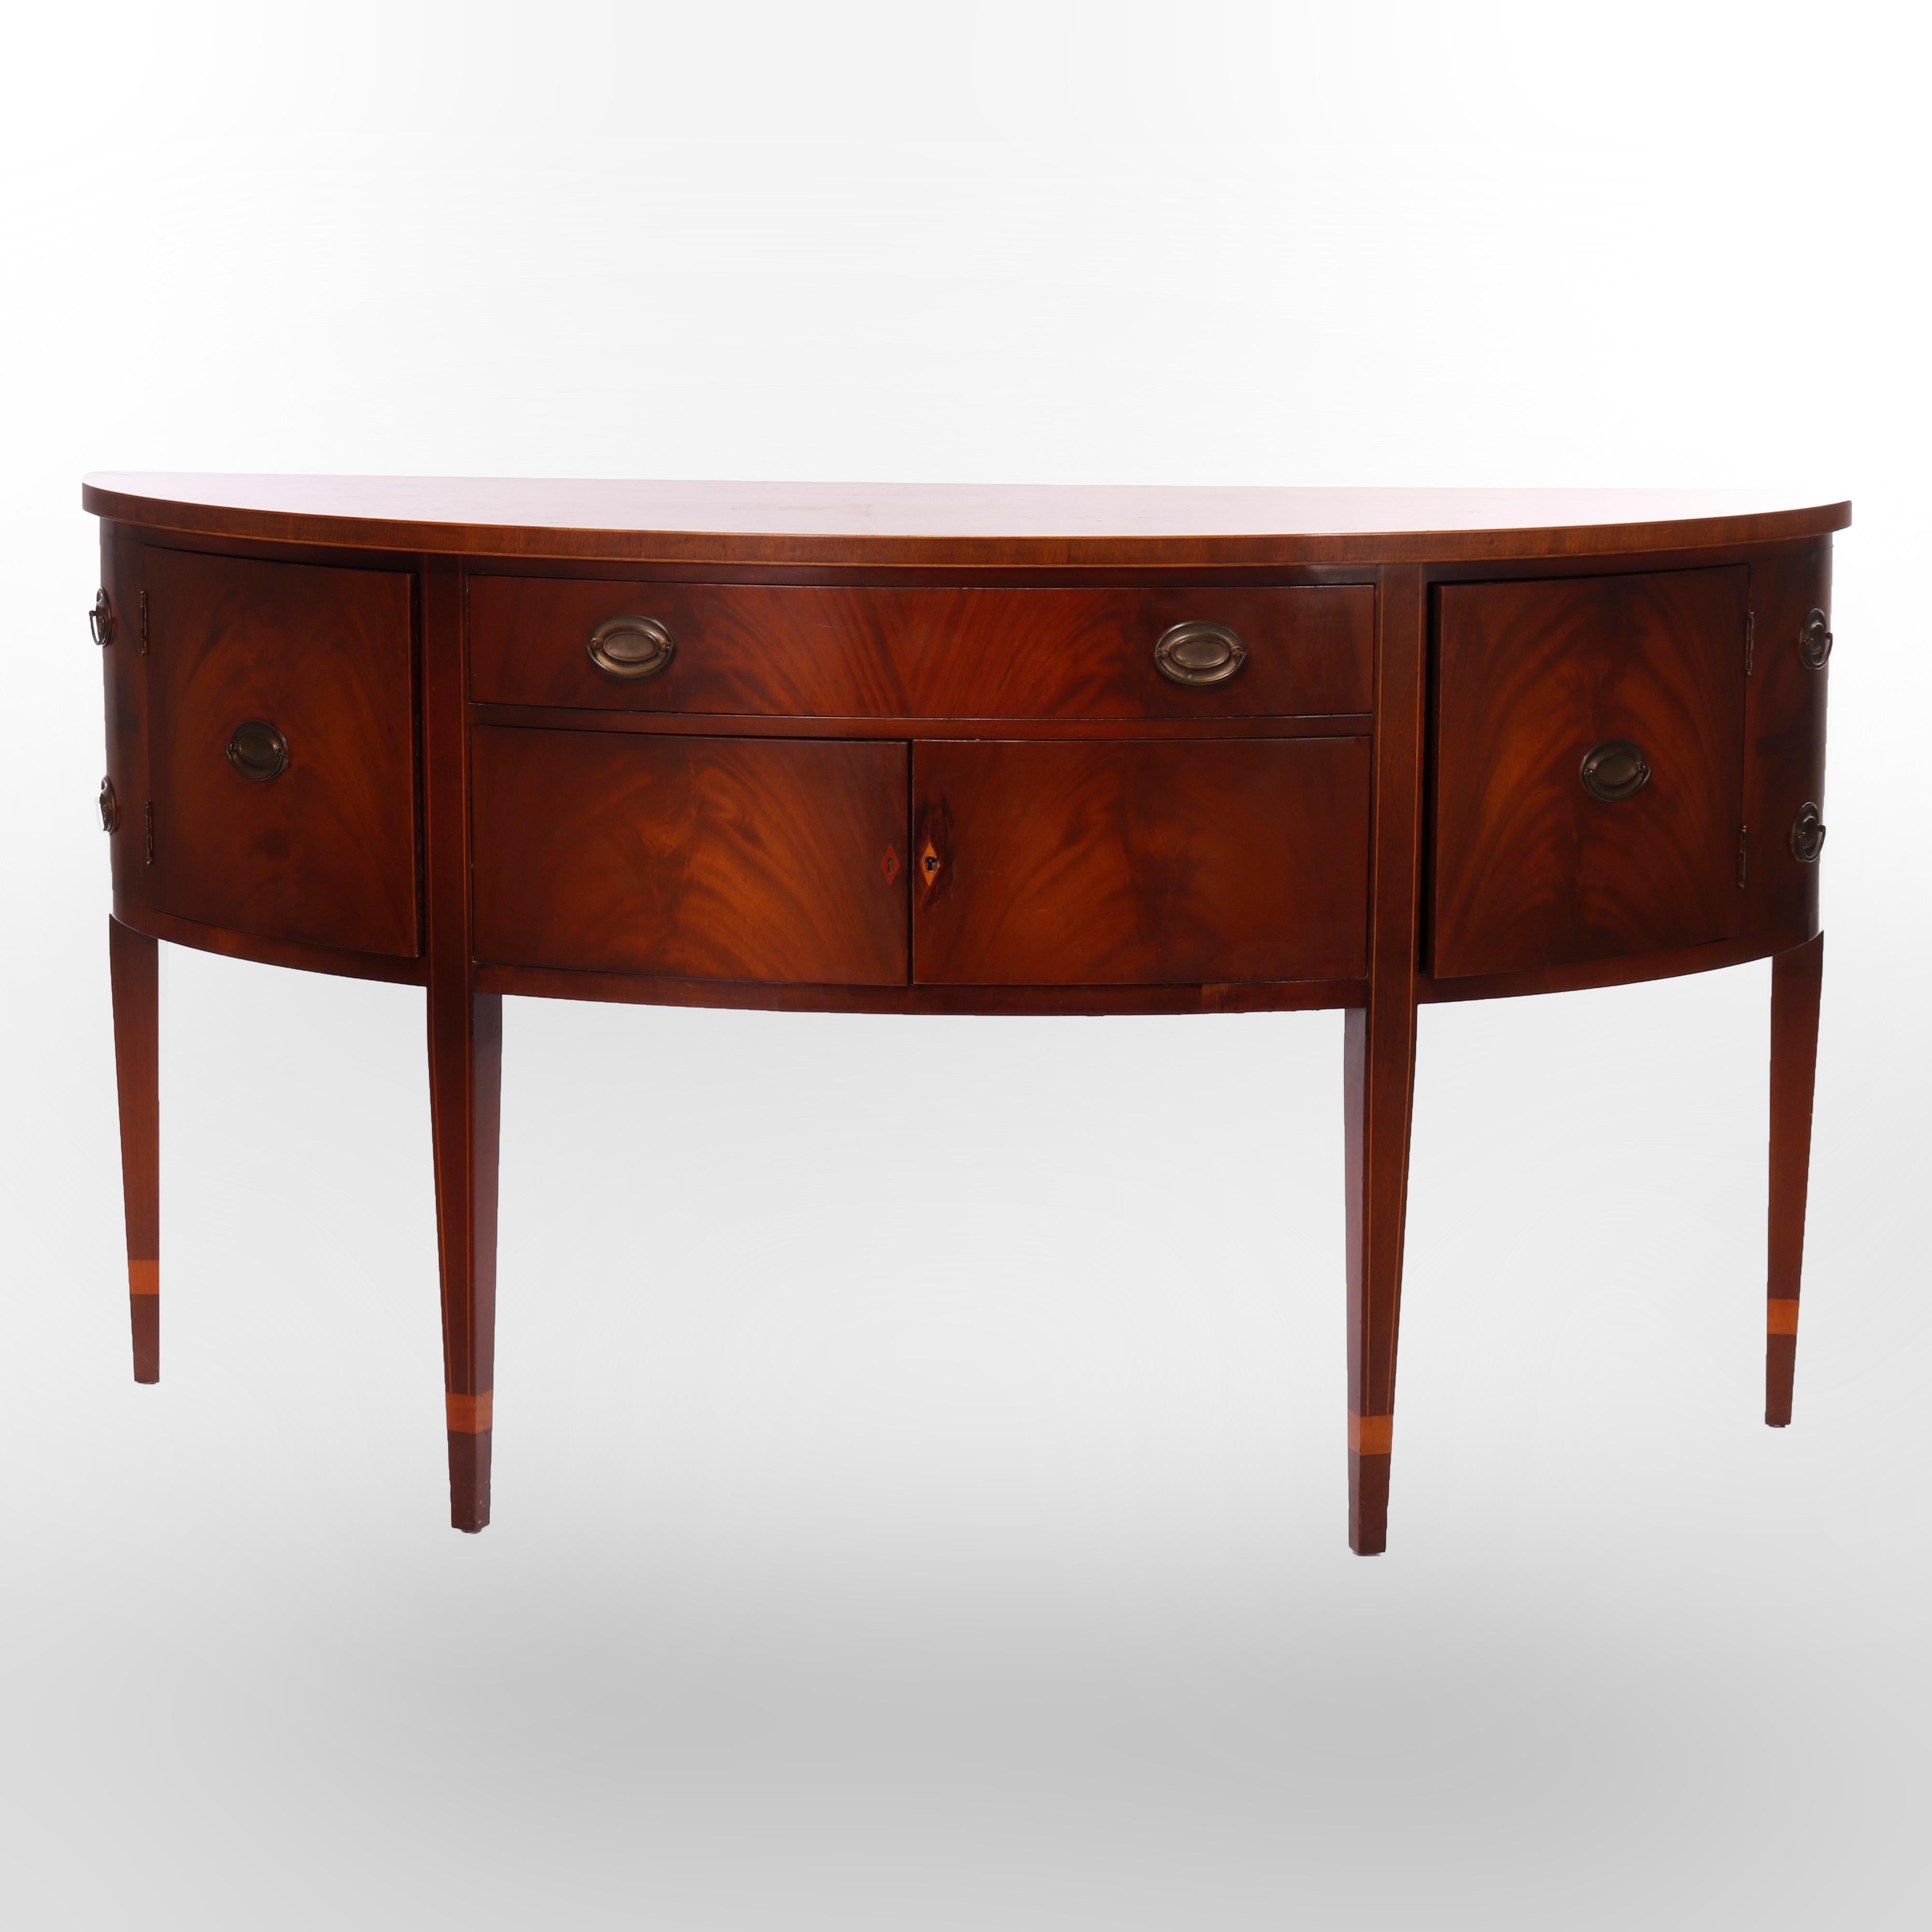 An antique sideboard by Kittinger offers flame mahogany construction in demilune form with case having drawers and cabinets, satinwood inlay banding and raised on square and tapered legs, maker label as photographed, c1930

Measures - 38.25'' H x